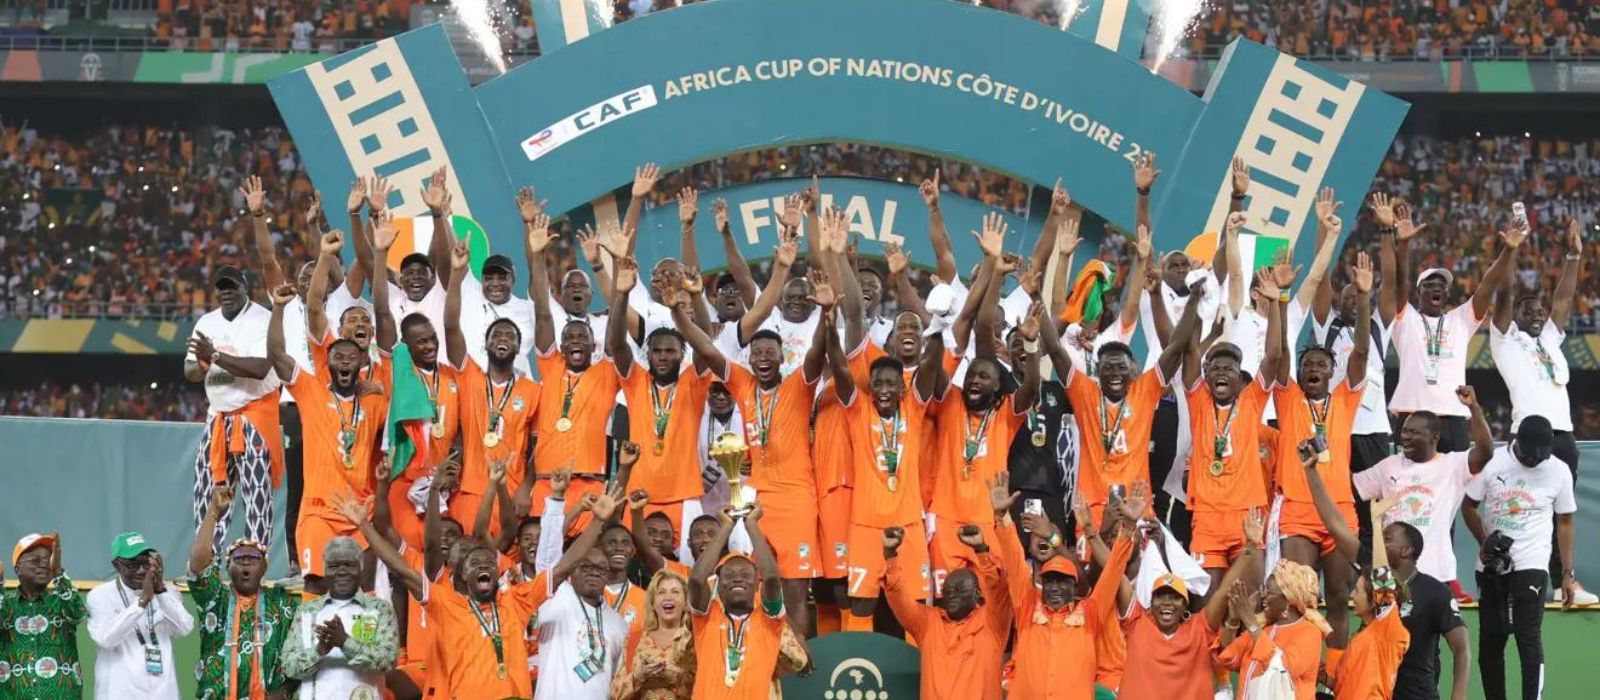 African Champions: Côte d’Ivoire claims third crown in history